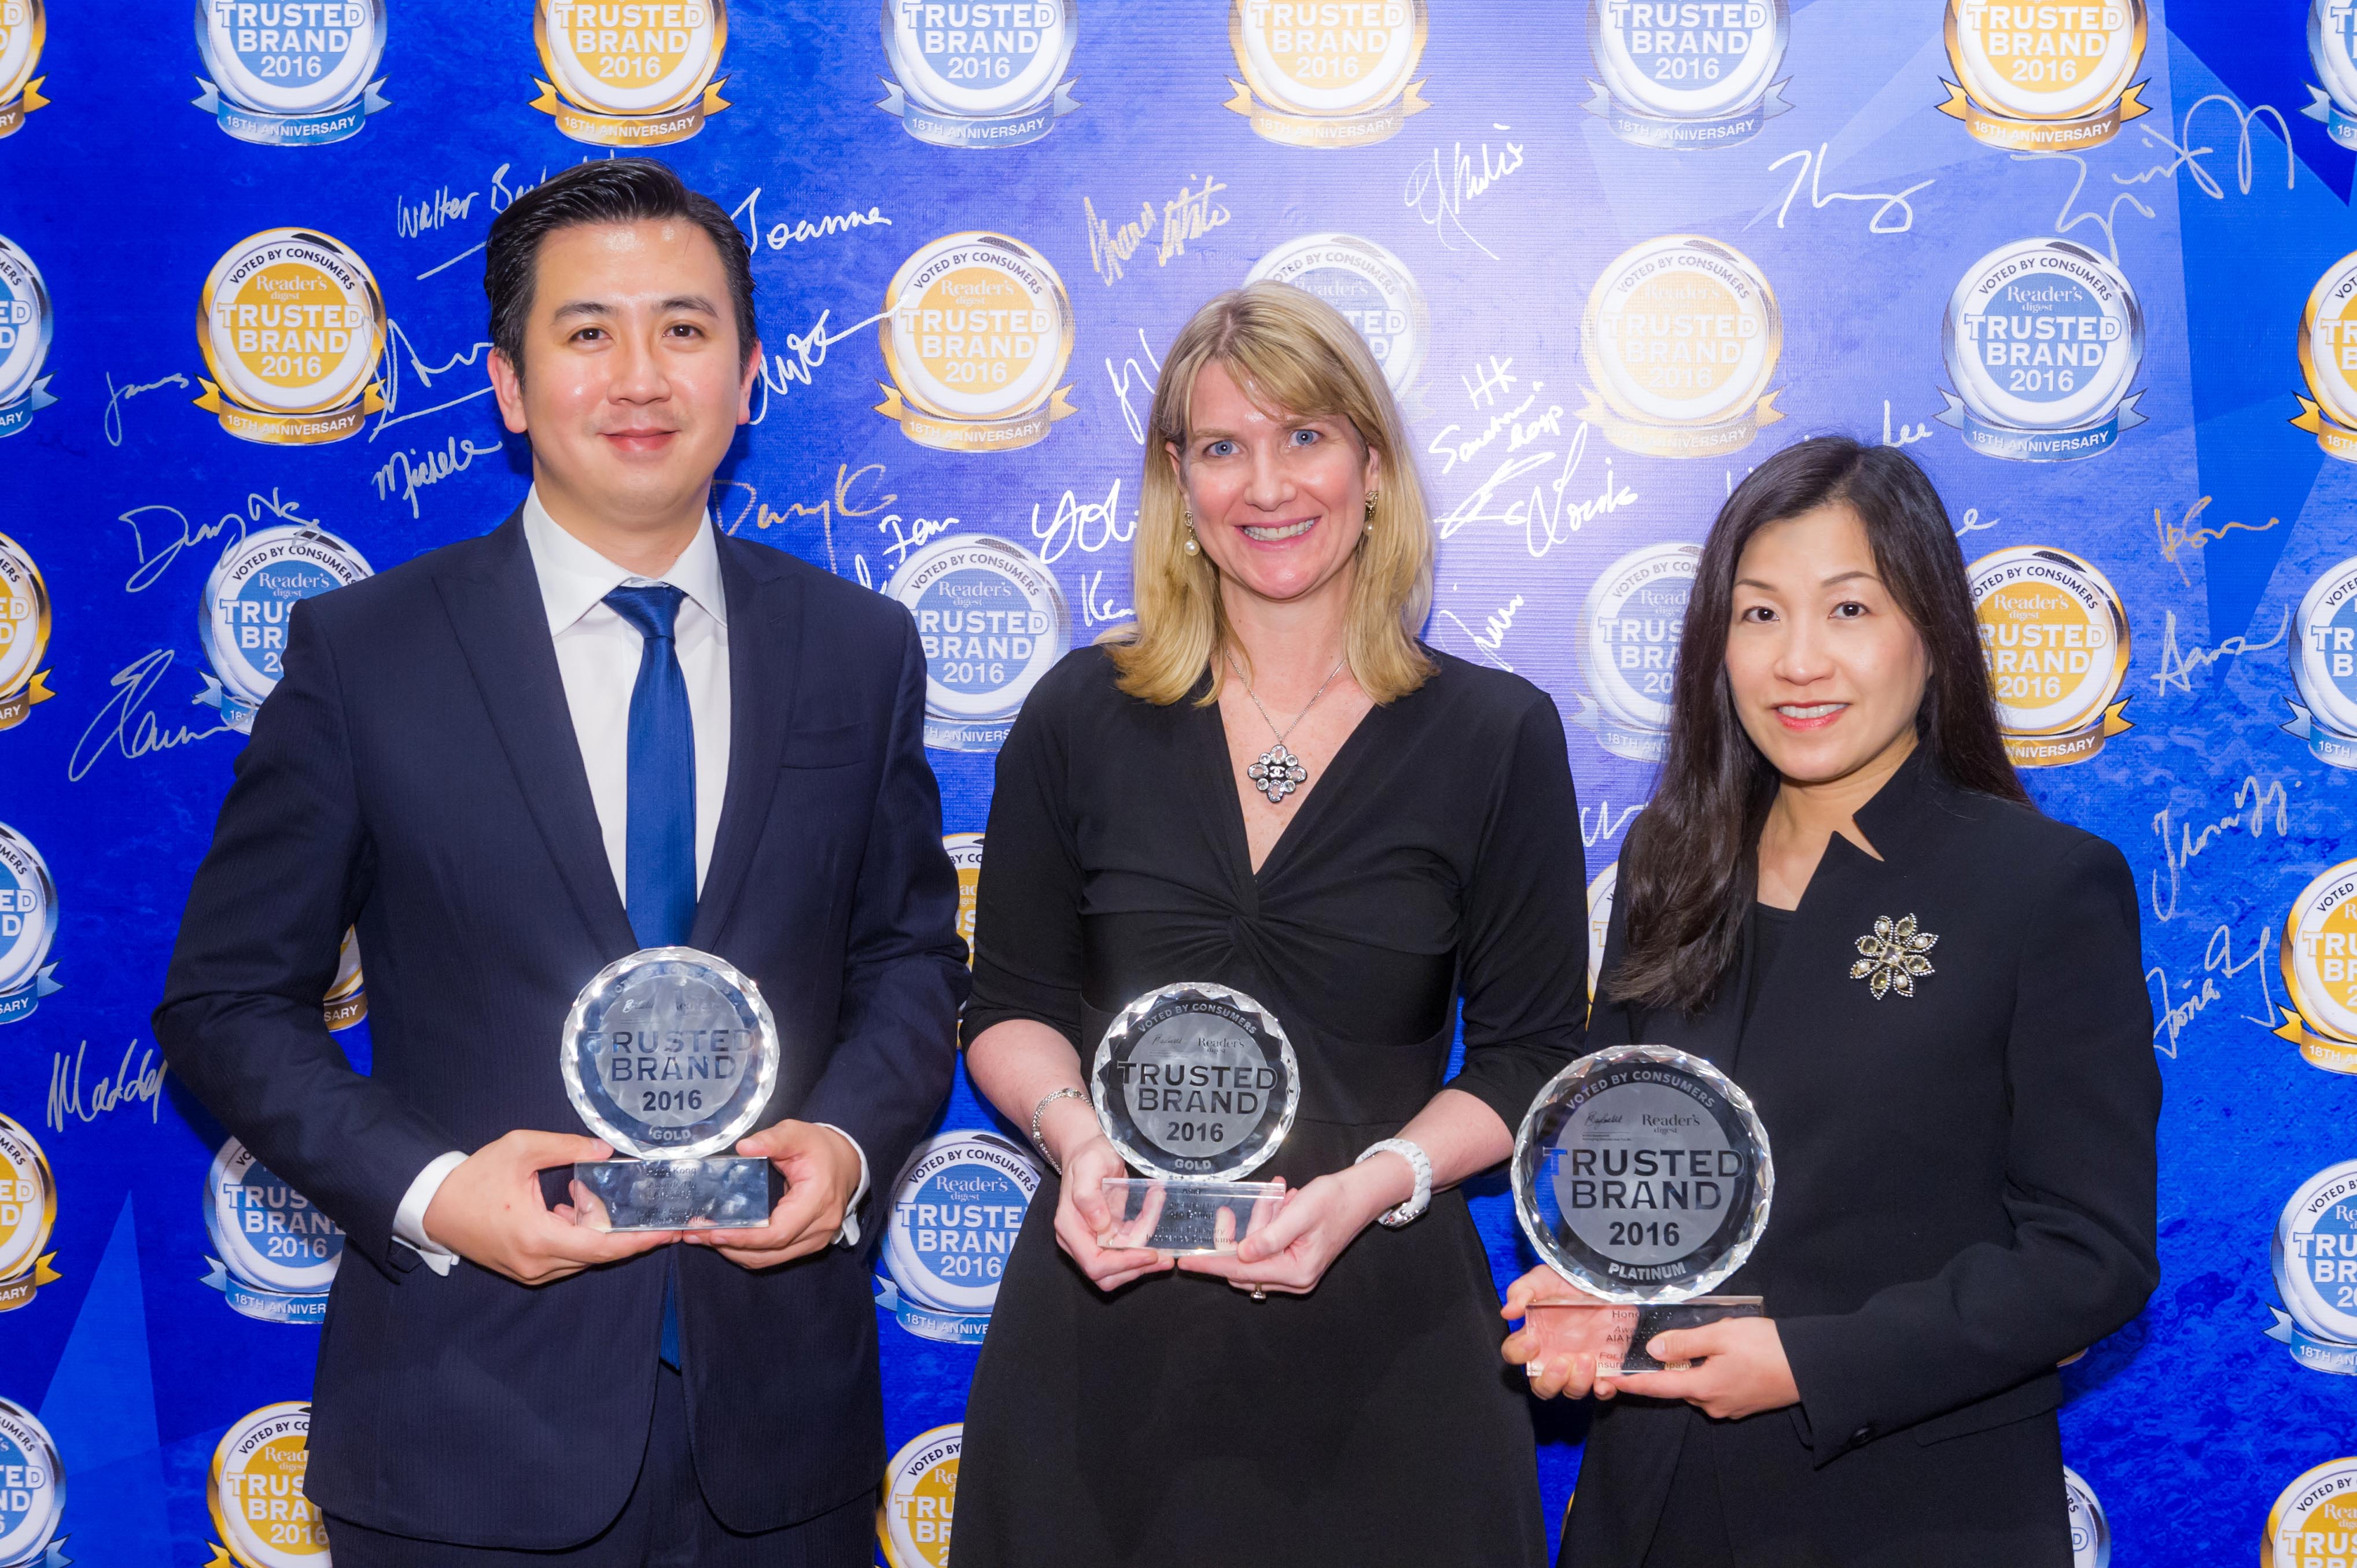 (From left to right) Mr Stephen Fung, Chief Executive Officer of AIA MPF; Ms Michele Flanagan, Director of Marketing, Group Strategy, Customer Propositions & Marketing, AIA Group and Ms Bonnie Tse, General Manager, Business Strategy and Marketing of AIA Hong Kong and Macau receive the “Reader’s Digest Trusted Brands” Awards.